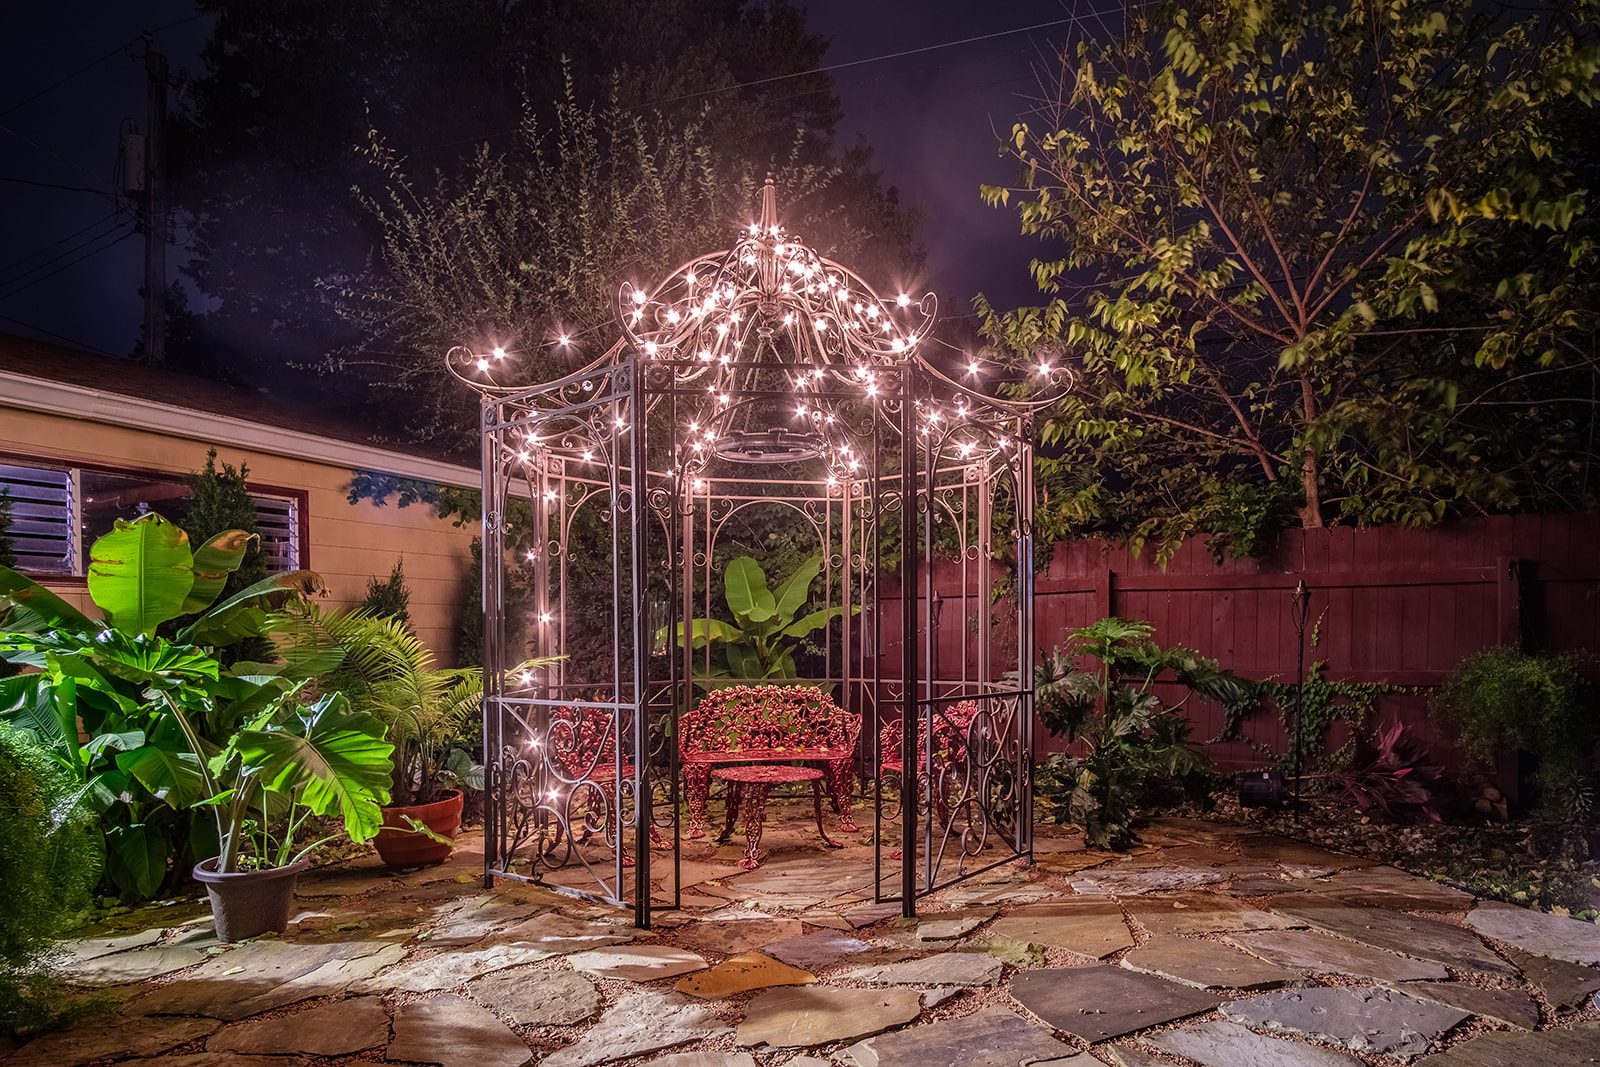 A gazebo with lights on top of it